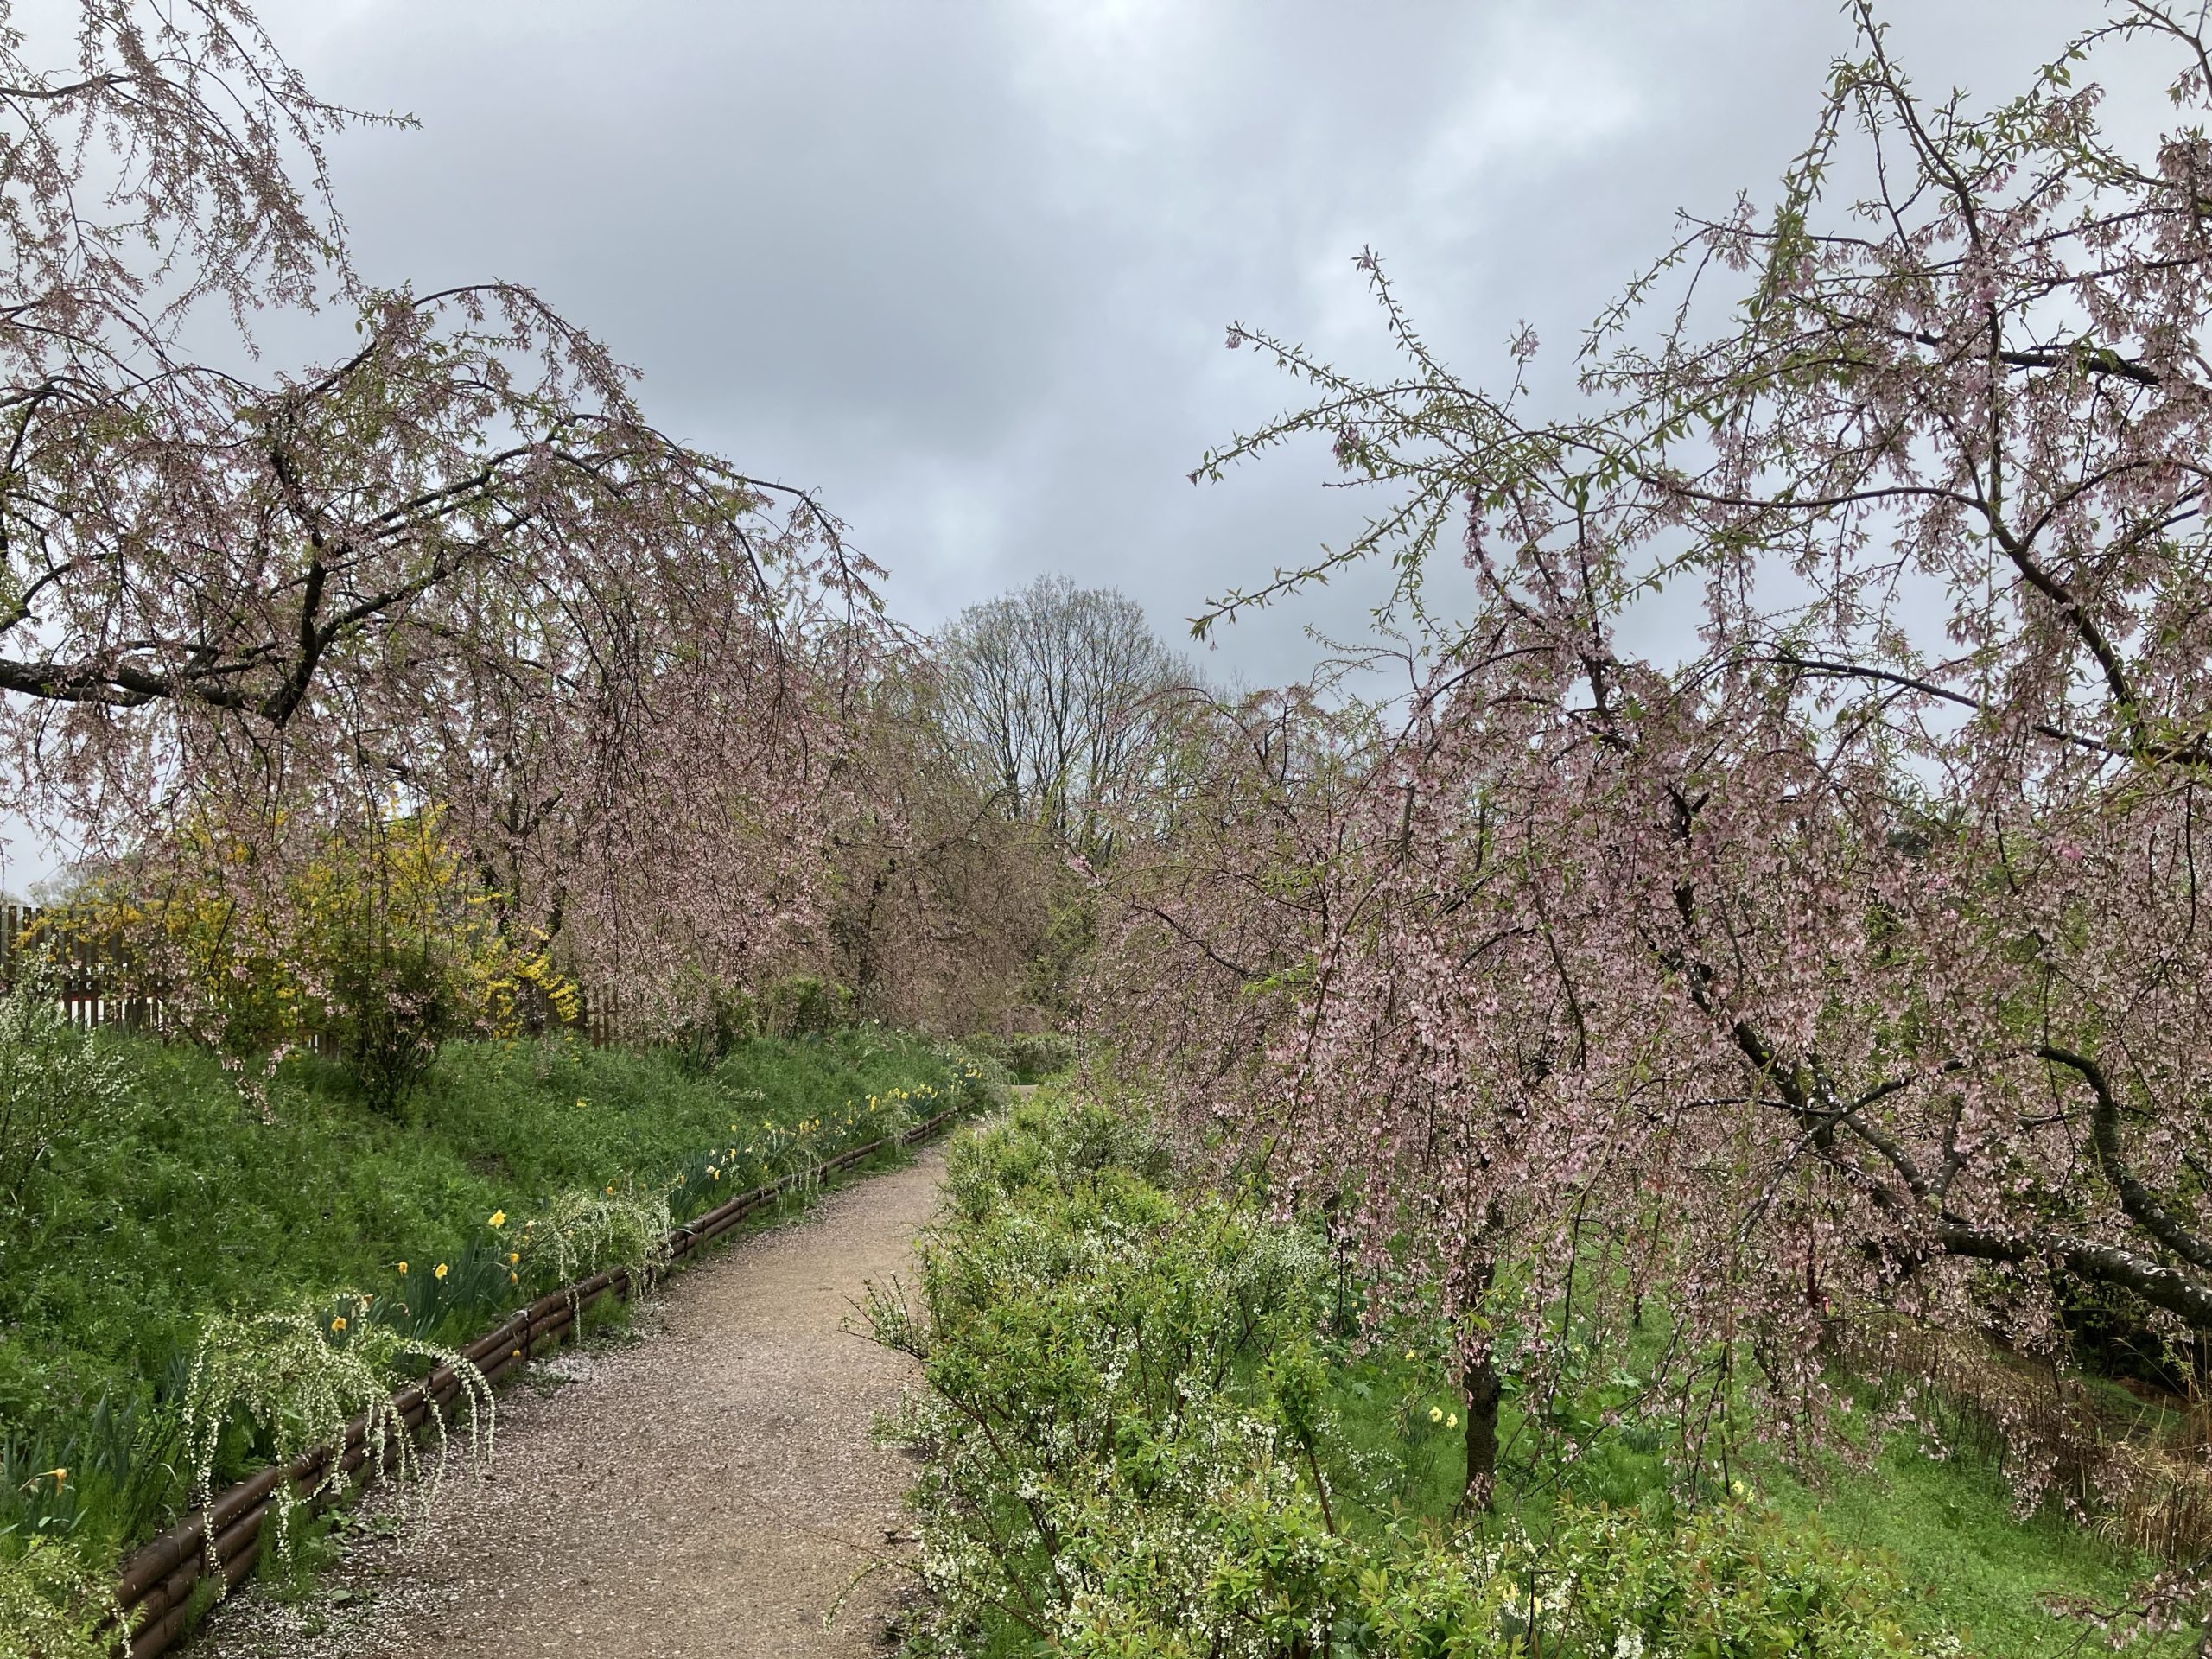 【Park open】Weeping cherry blossom【Past the peak viewing time】Rape blossoms【Best time to see】